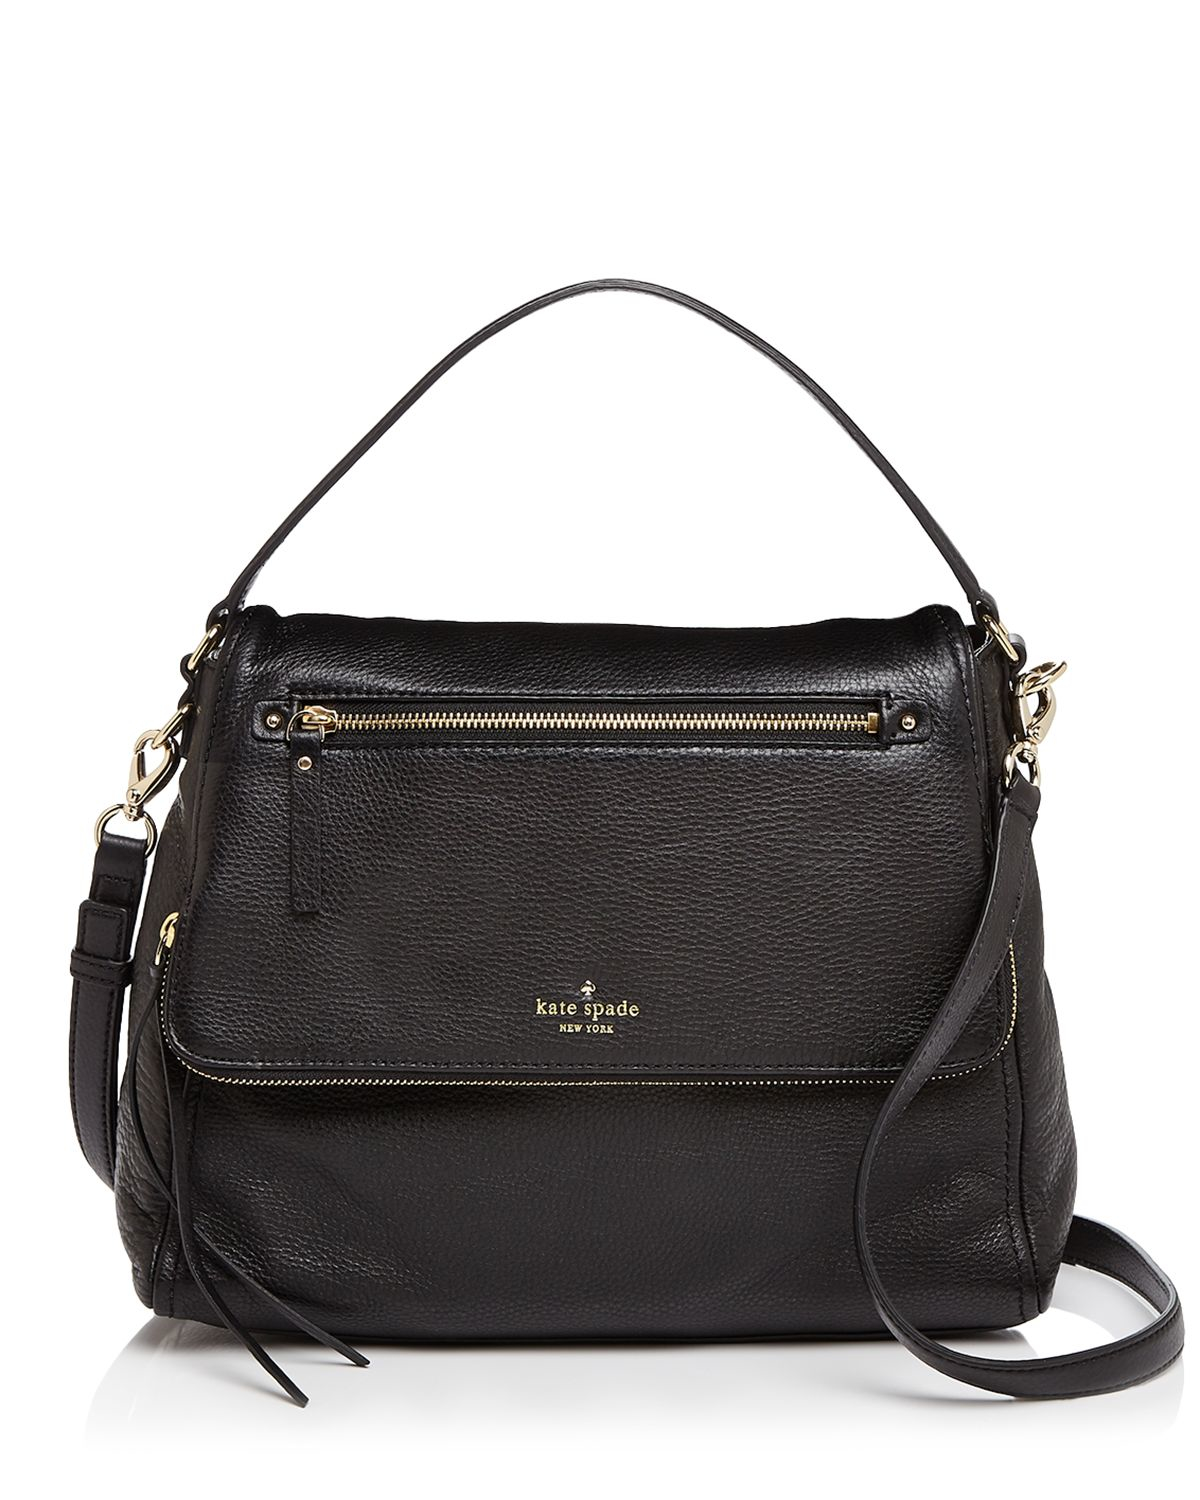 Lyst - Kate spade new york Cobble Hill Toddy Shoulder Bag in Black